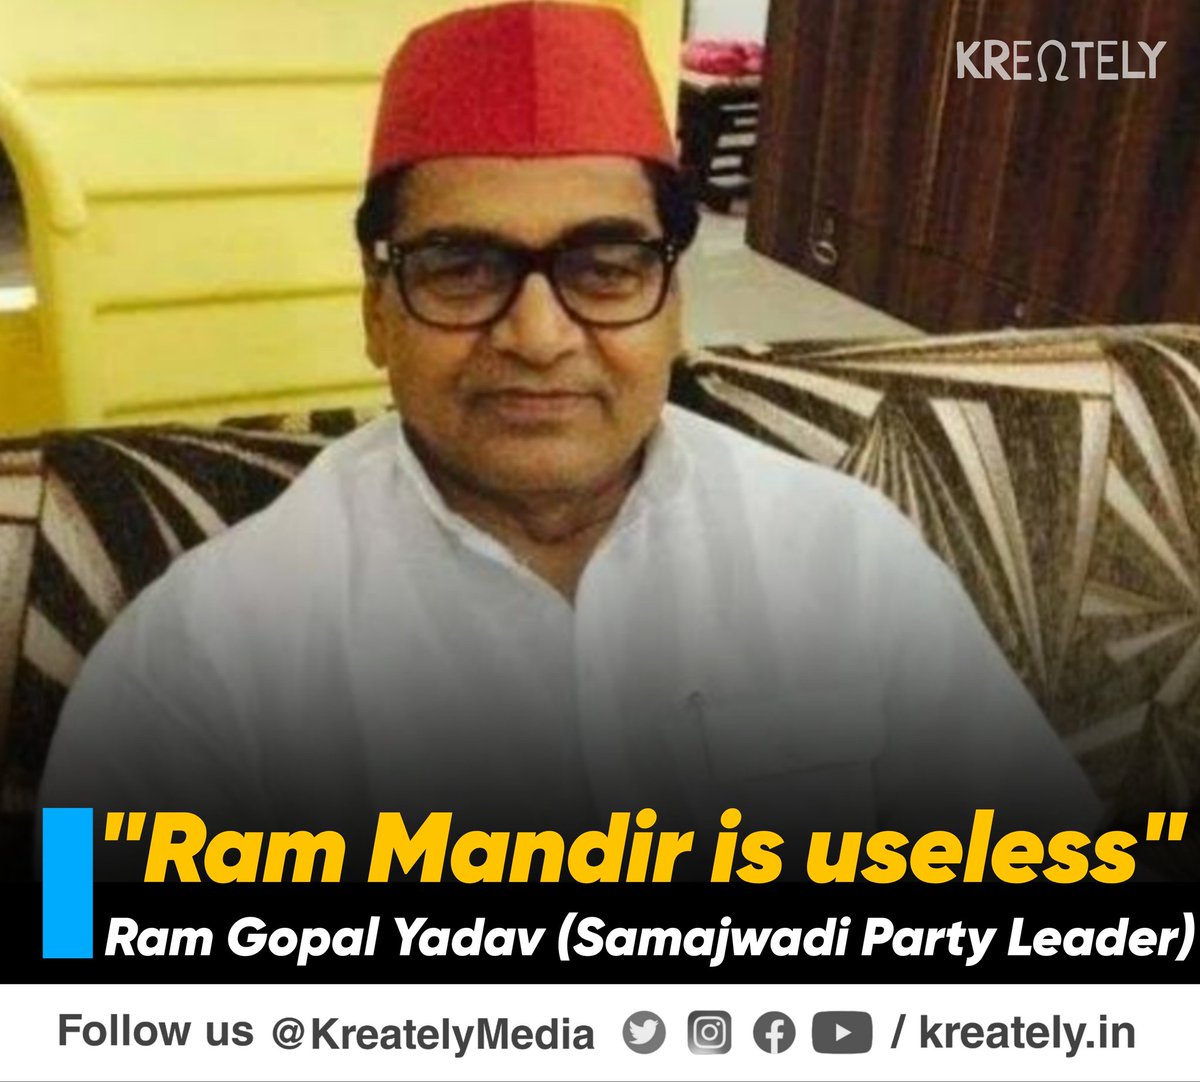 Wake Up before its too Late !! One Secular Political Party wants to Eradicate Sanatan Dharma Congress plans to Target Ram Mandir Verdict Samjwadi Party Says Ram Mandir is Useless Have you ever heard this for any Mosque or Church by leader of any Secular Parties?